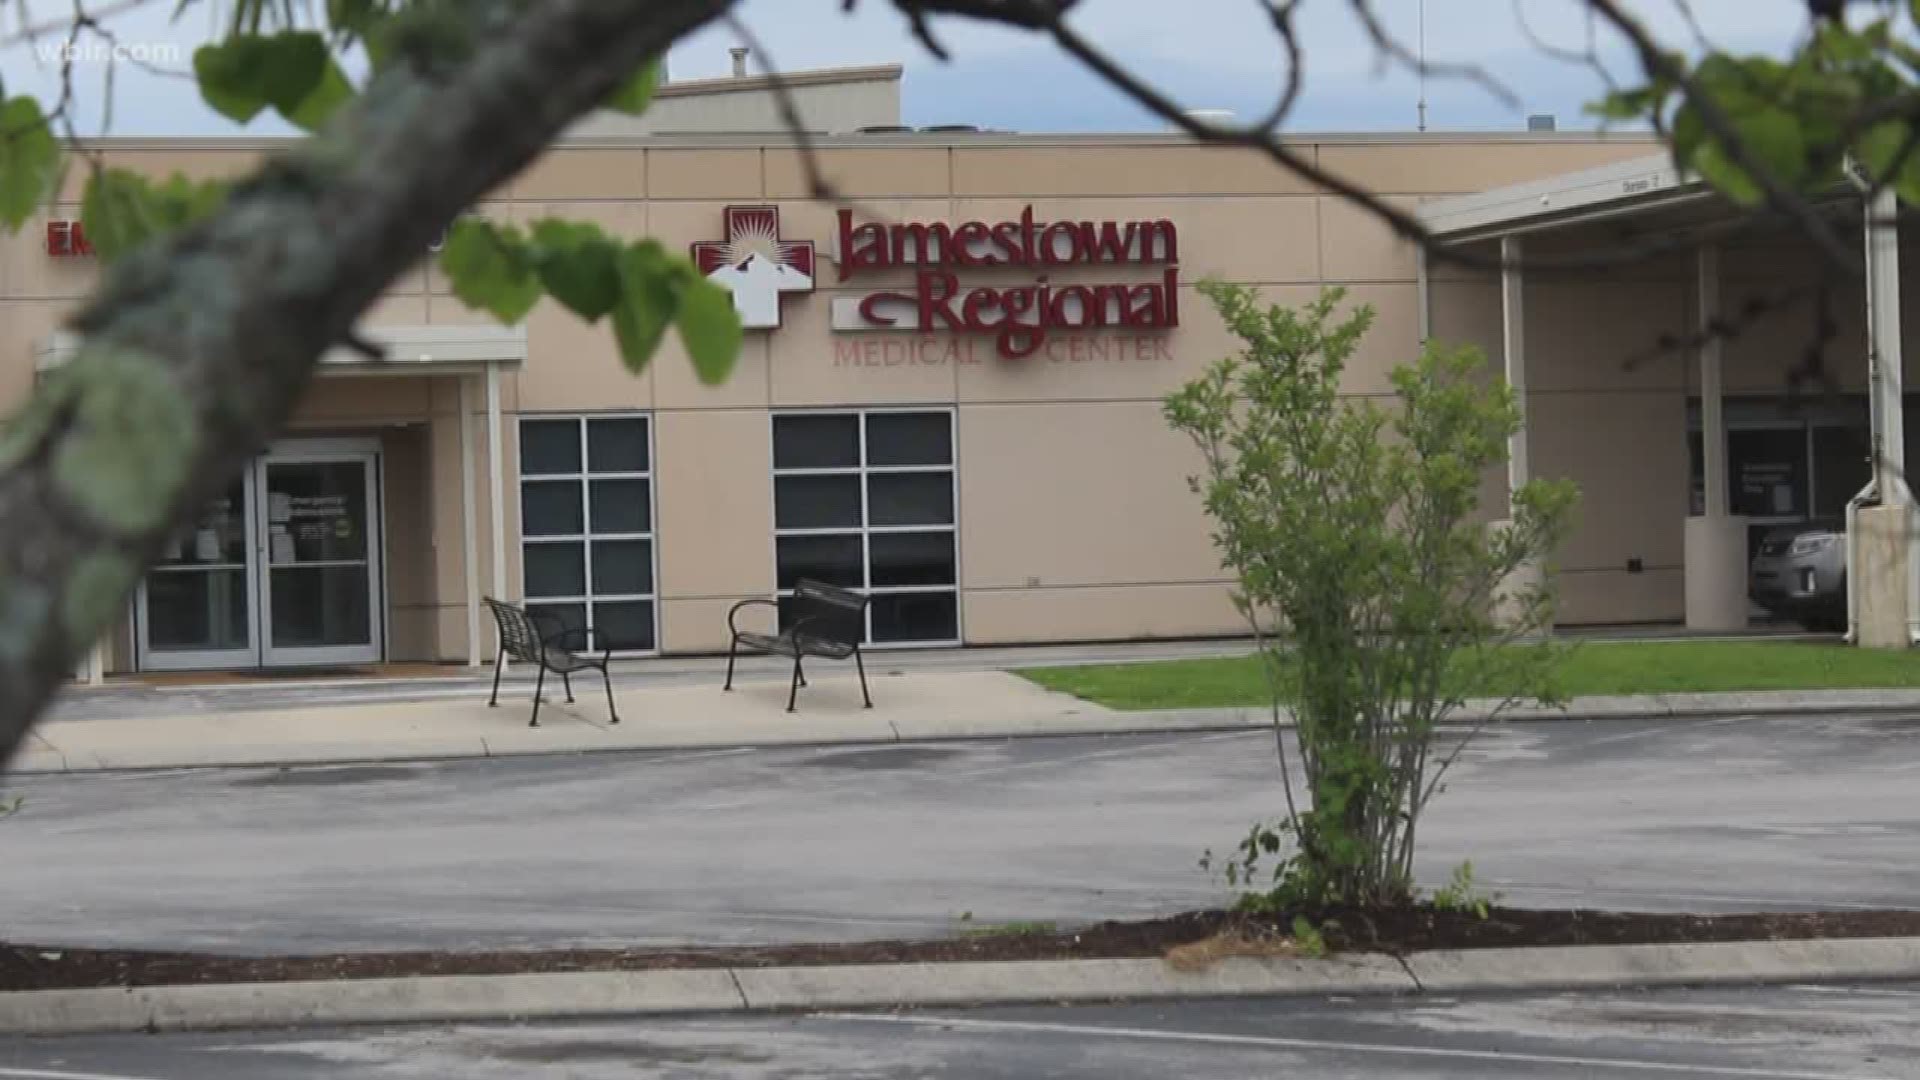 Employees at the Rennova hospital in Jamestown say they're struggling to file for unemployment benefits. A state lawmaker has asked the department of labor to conduct an audit into the company.